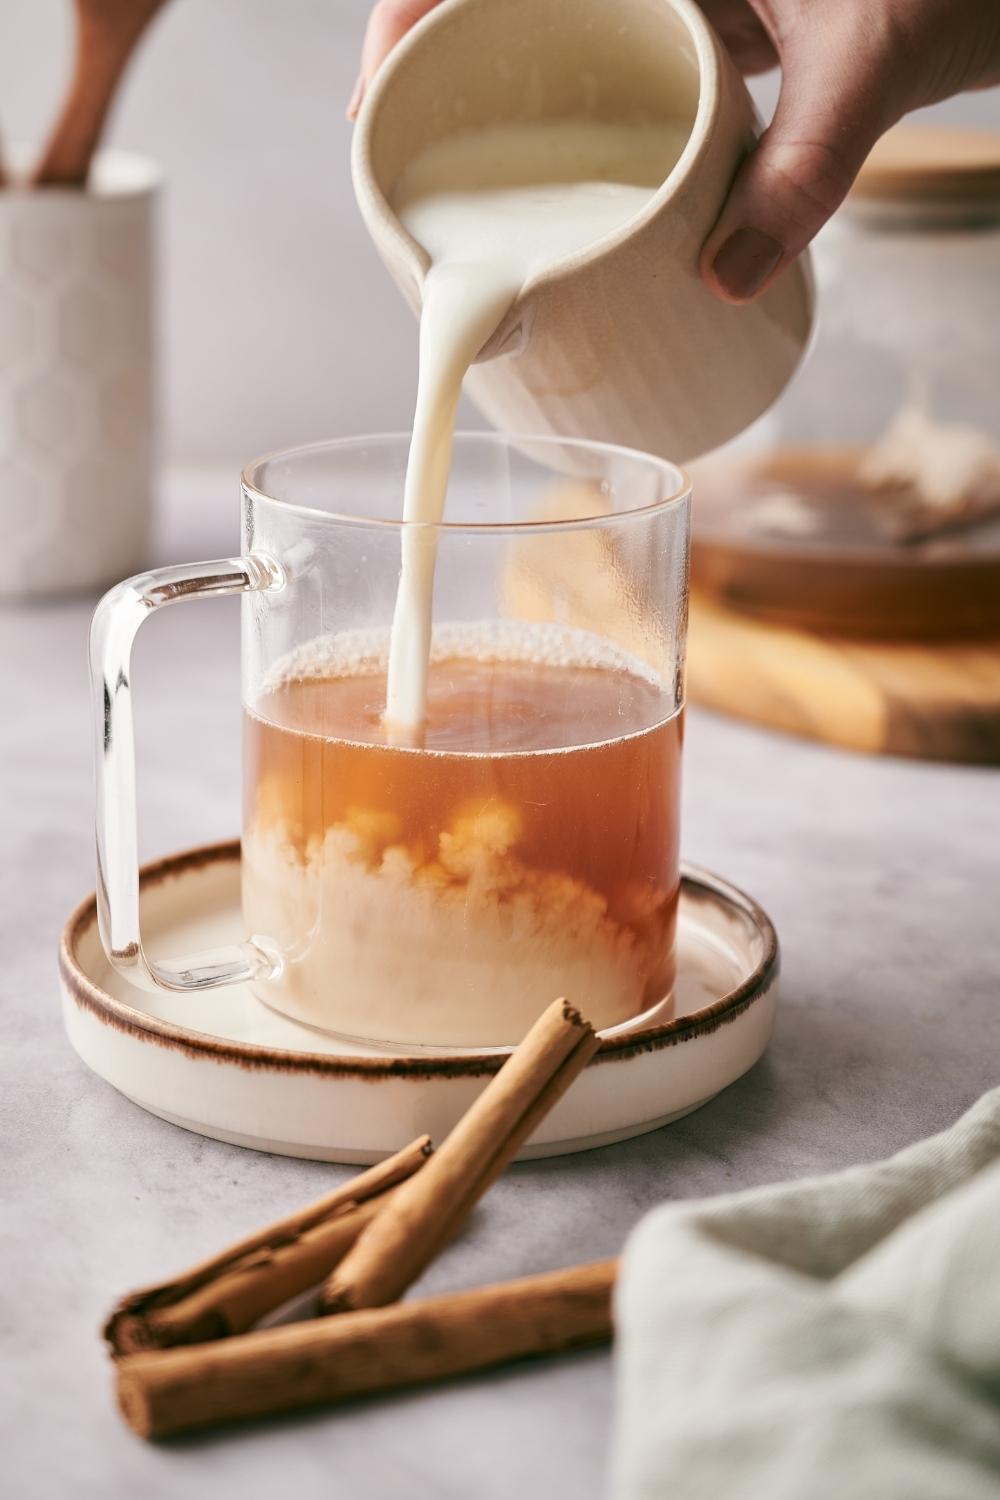 A clear mug with chai tea in it. A hand is pouring a small pitcher with milk into the mug.